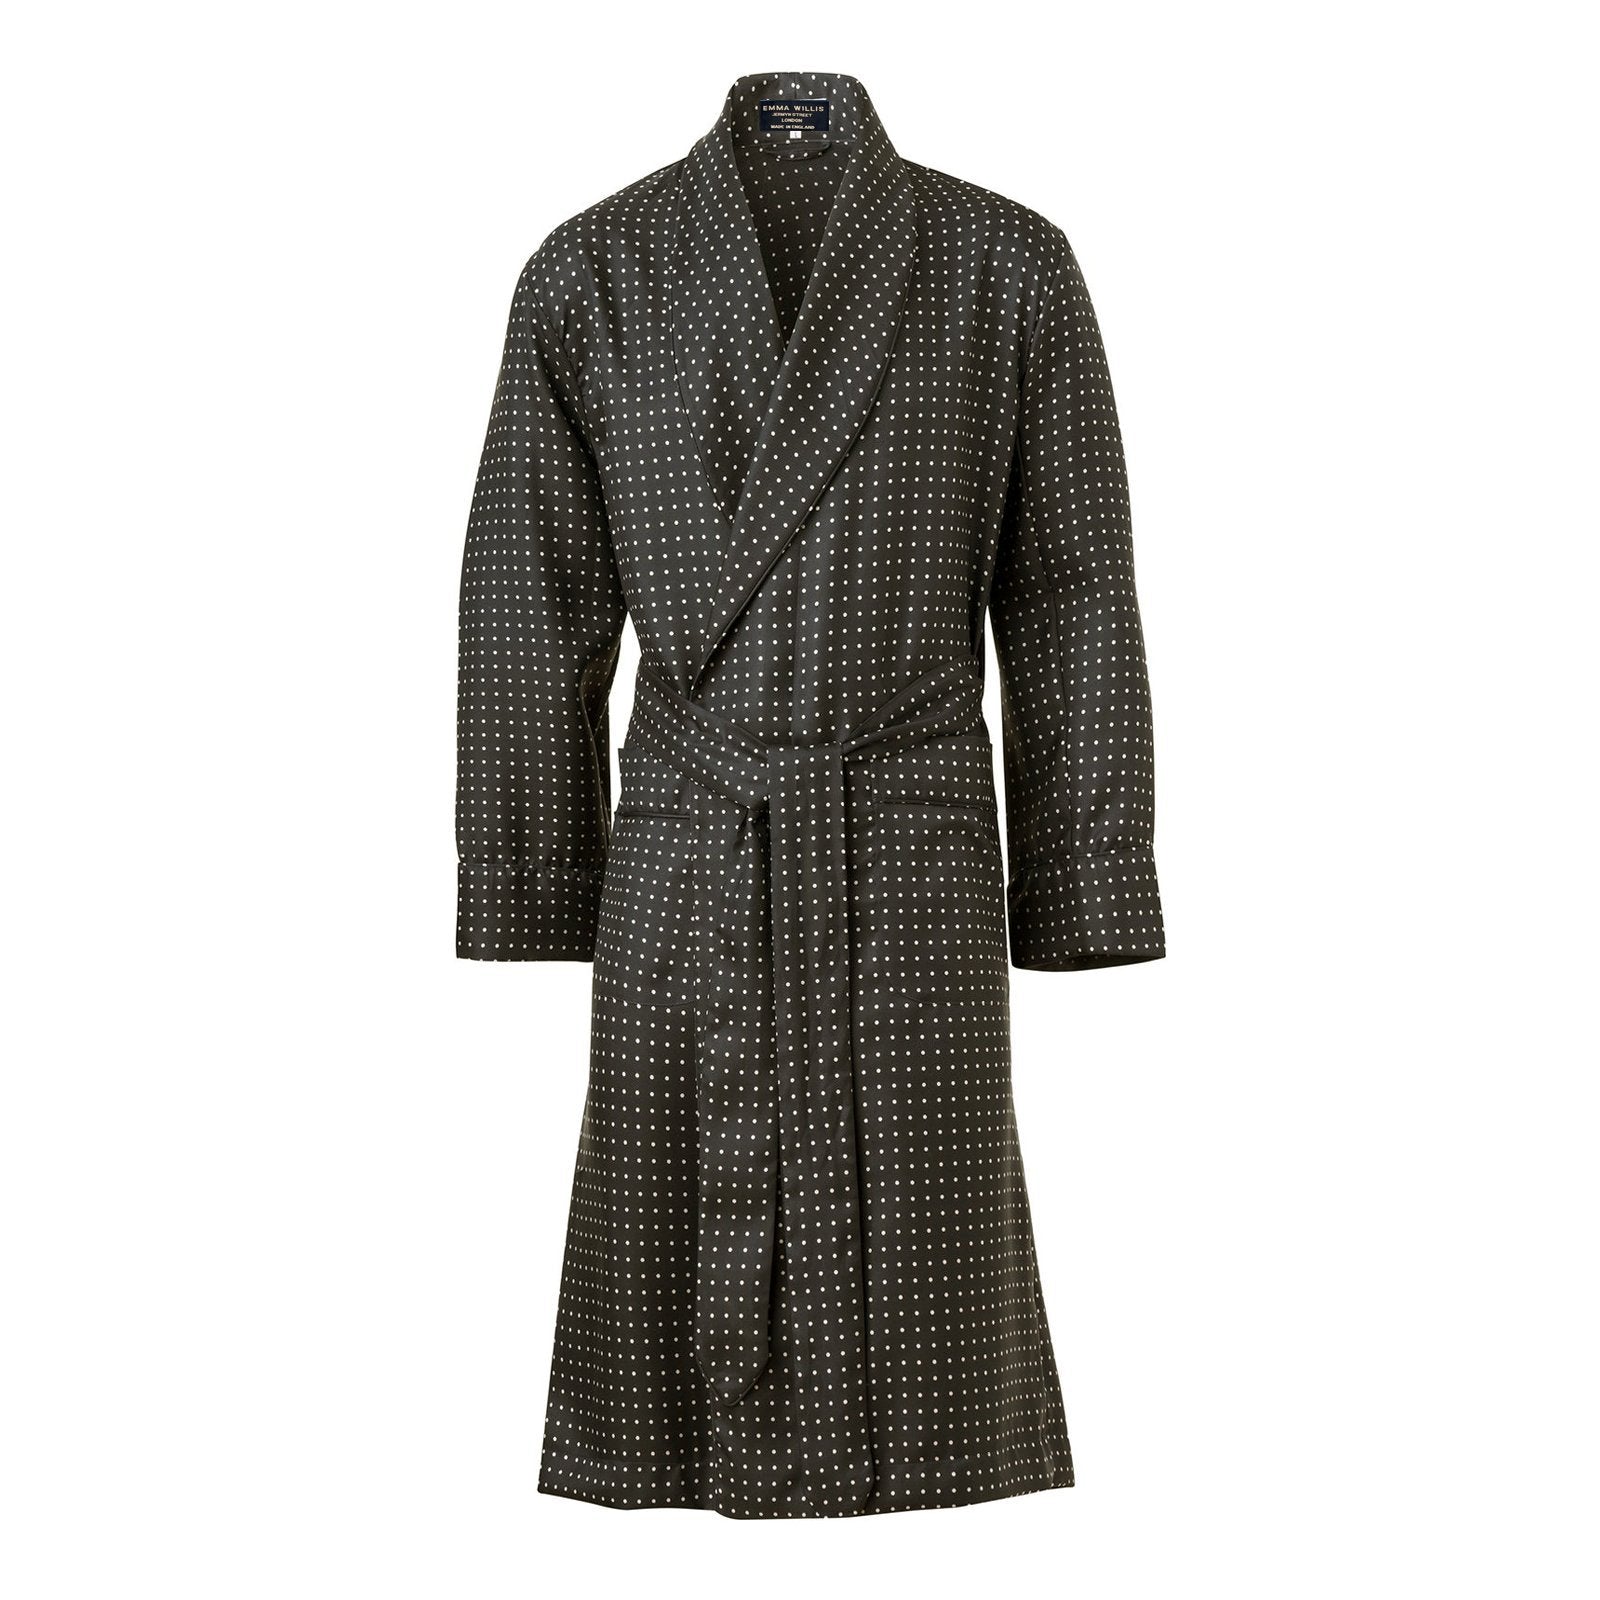 Chocolate and White Spot Silk Dressing Gown - New Collection - Emma Willis